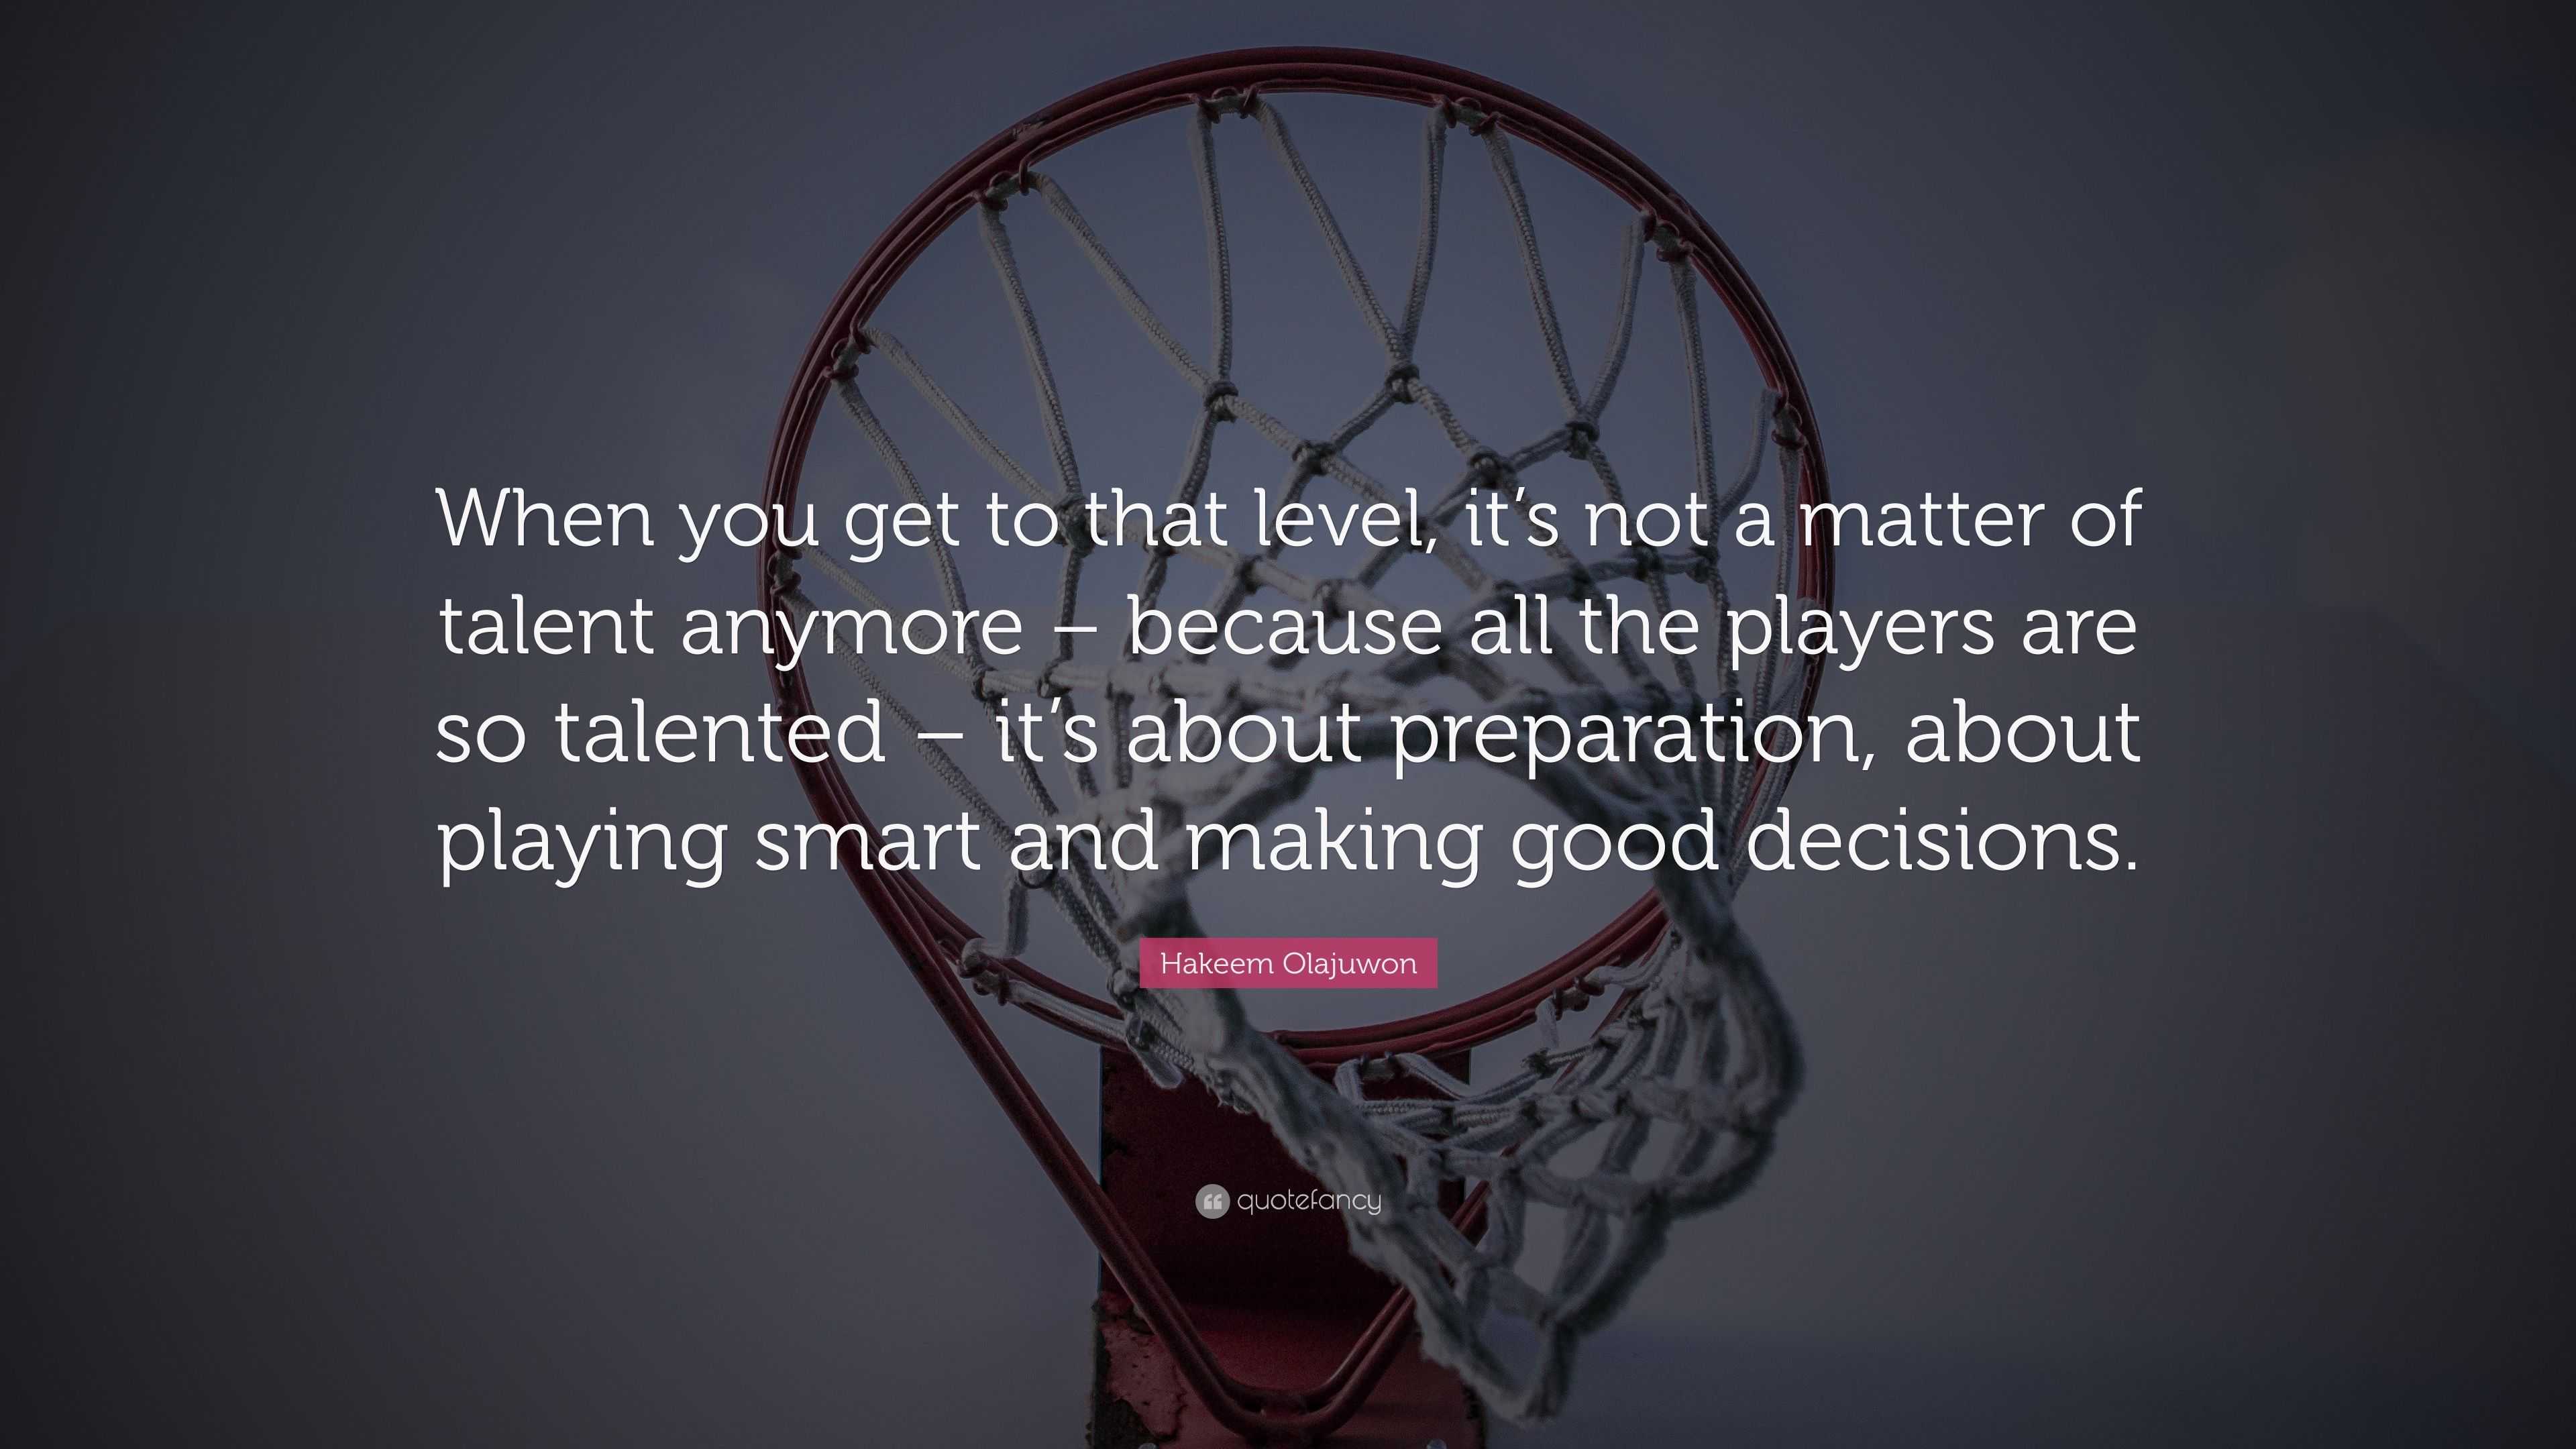 Hakeem Olajuwon Quote: “When you get to that level, it’s not a matter ...